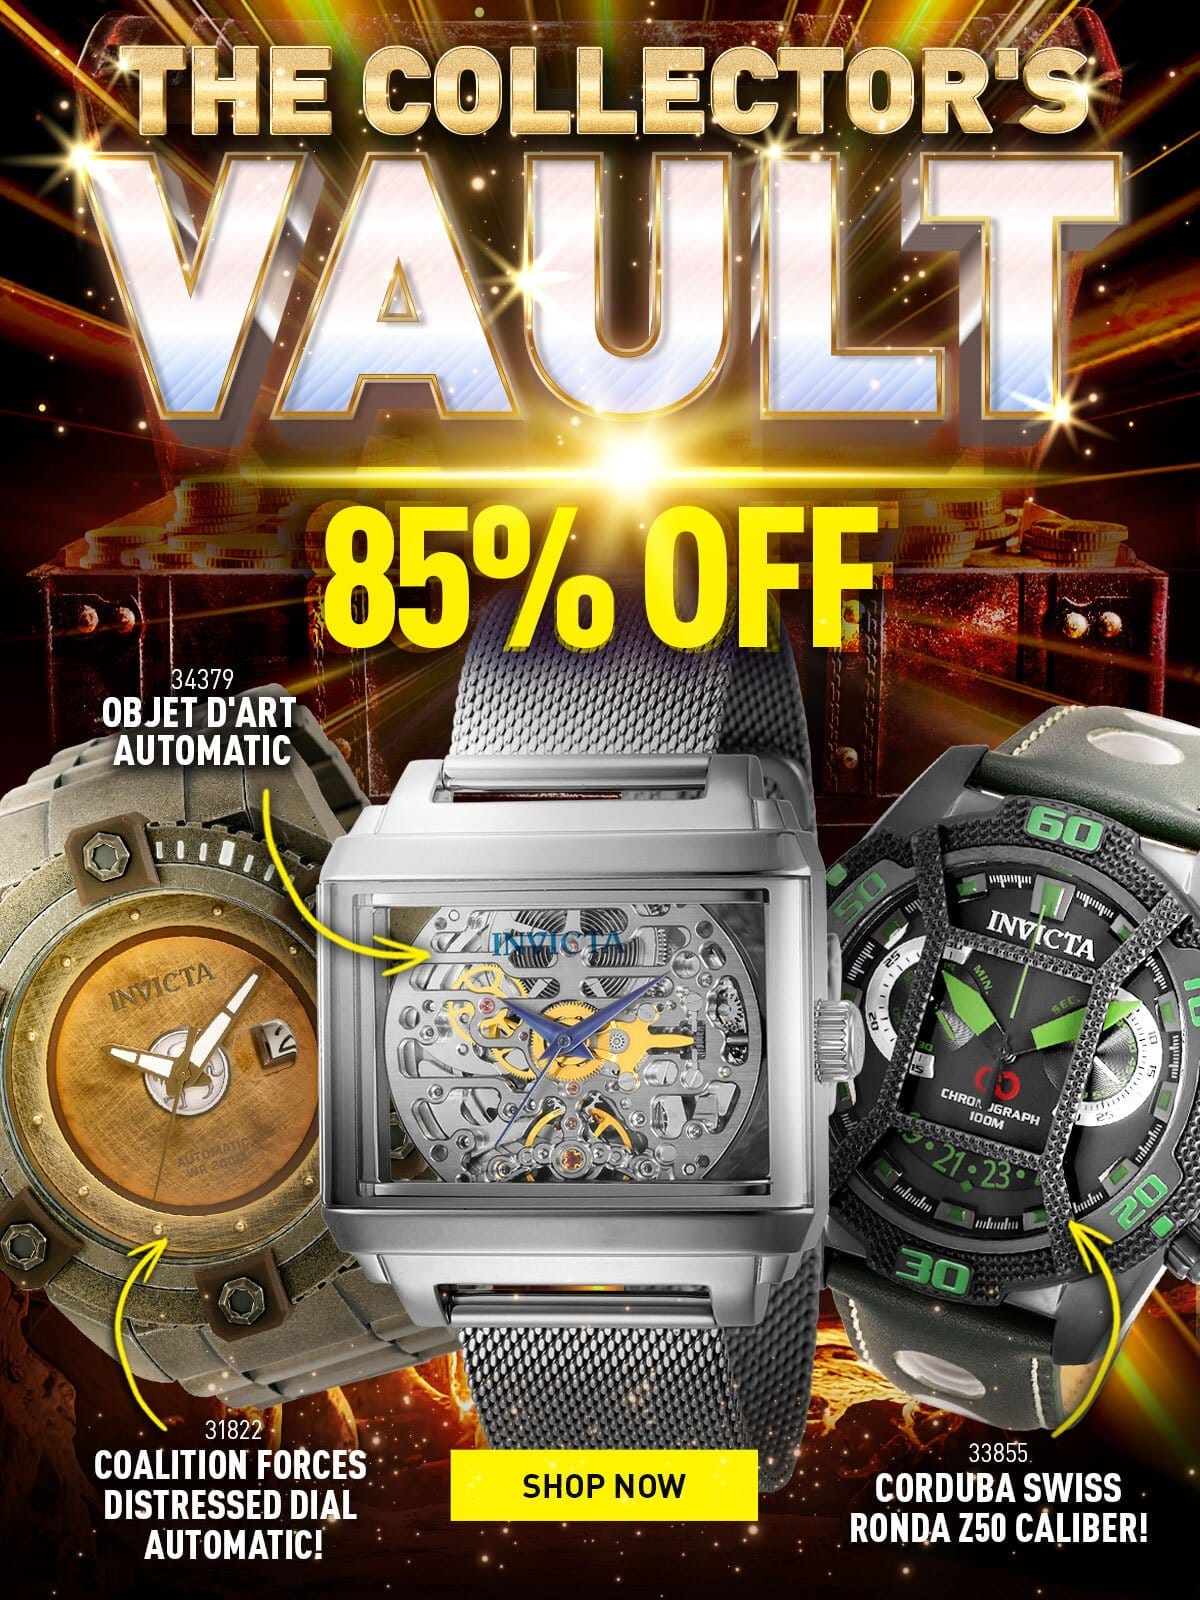 The collector's vault - 85% OFF!